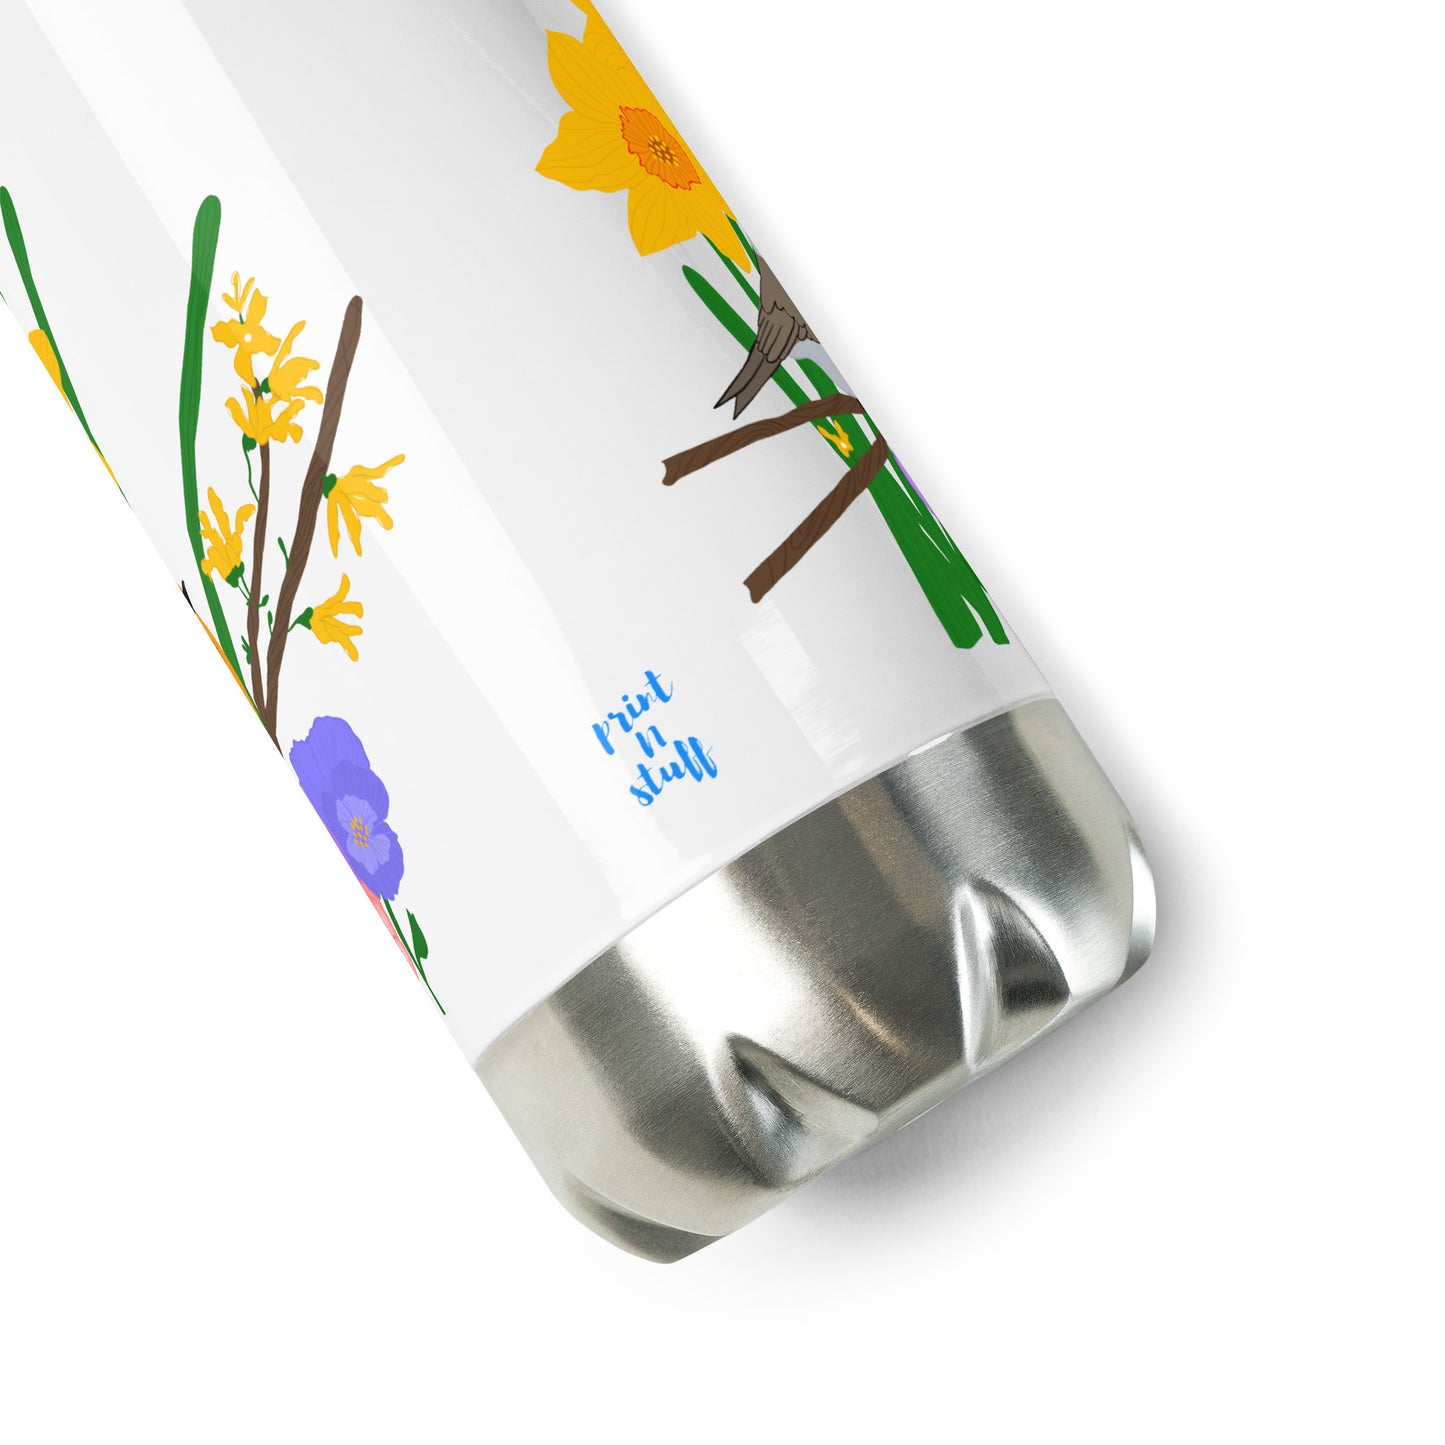 Robin and Daffodils - Thermos Bottle